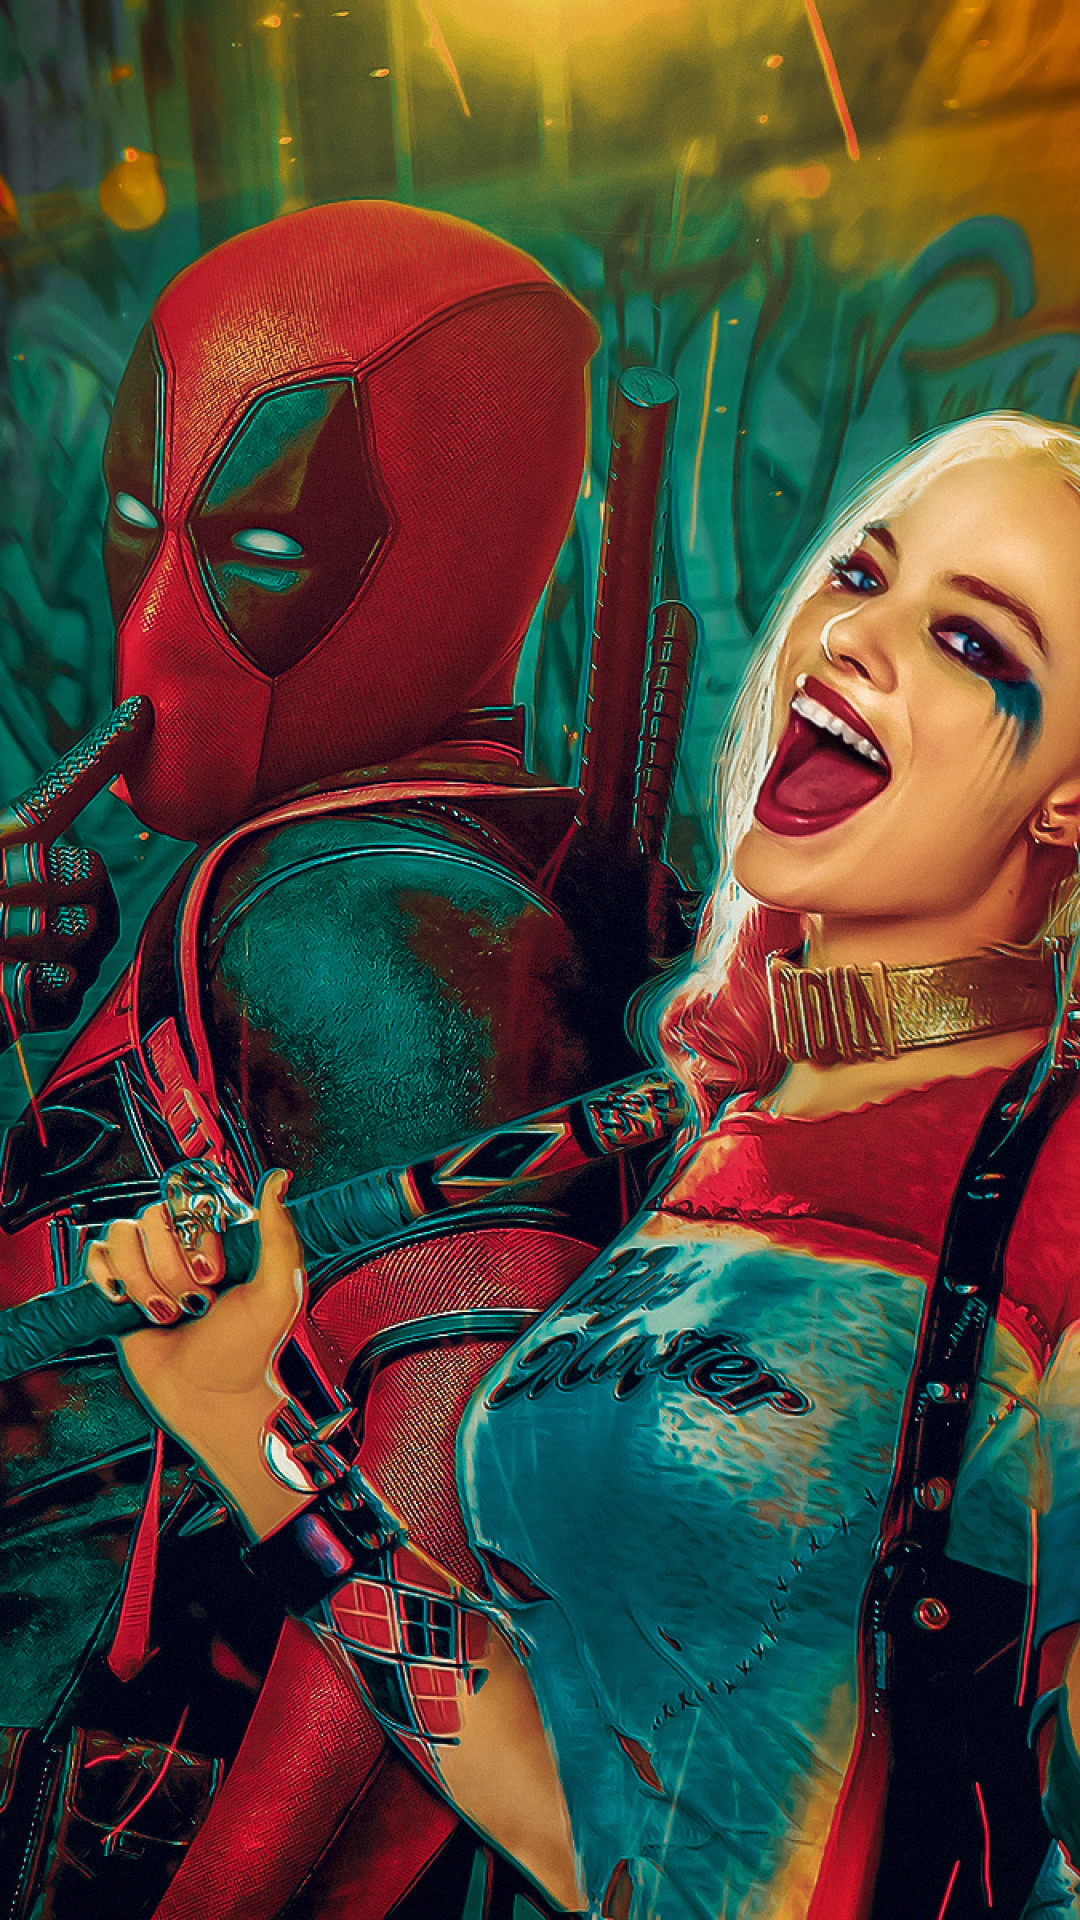 1080x1920 Harley Quinn Iphone 6 Wallpaper HD | Cosplay iPhone Wallpapers .